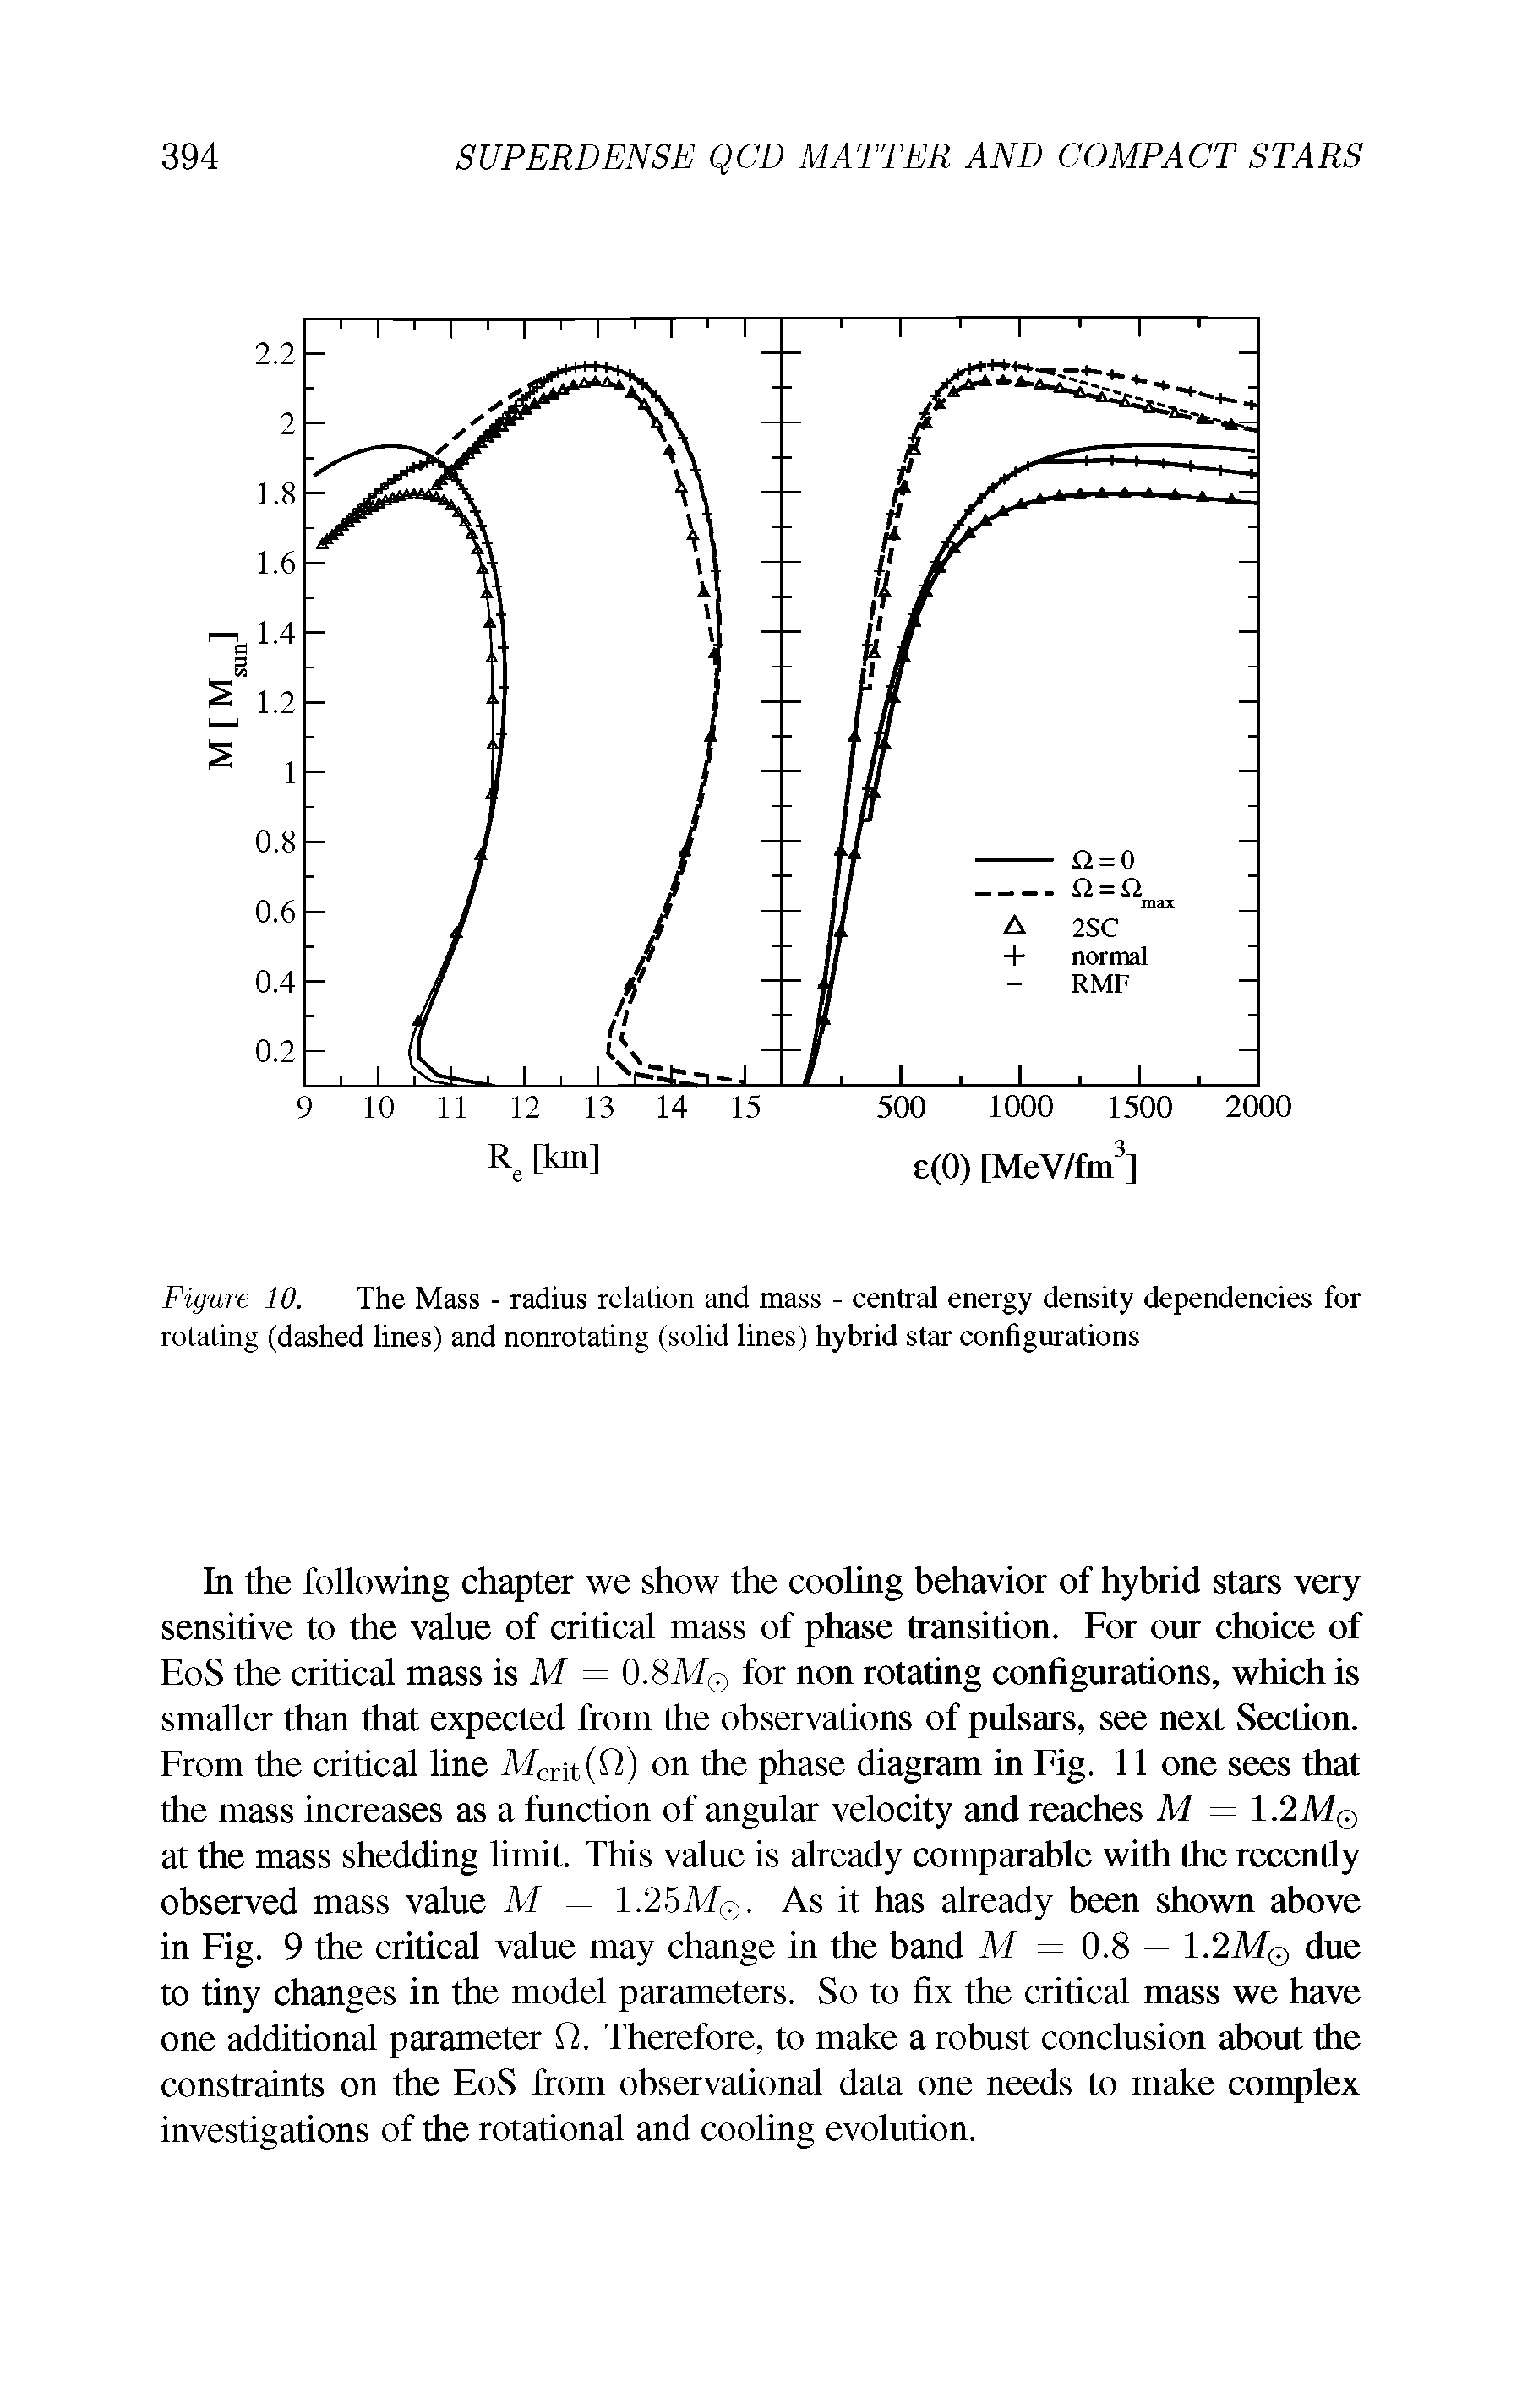 Figure 10. The Mass - radius relation and mass - central energy density dependencies for rotating (dashed lines) and nonrotating (solid lines) hybrid star configurations...